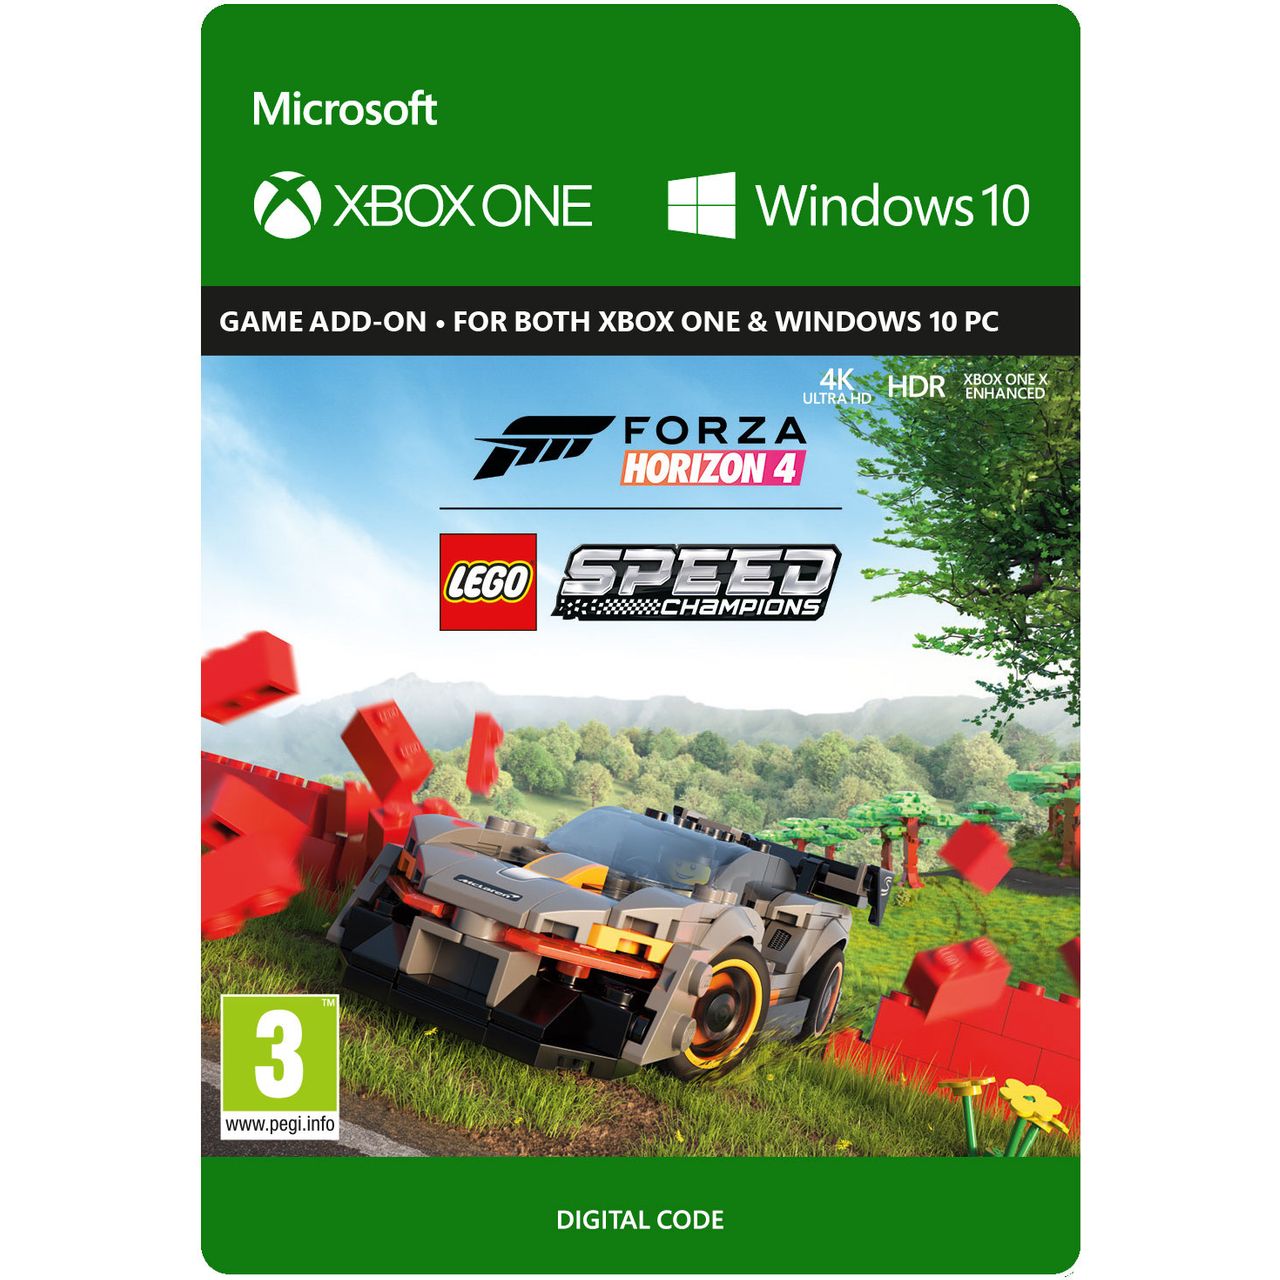 Forza Horizon 4 LEGO® Speed Champions Add On for Xbox One [Enhanced for Xbox One X] Review